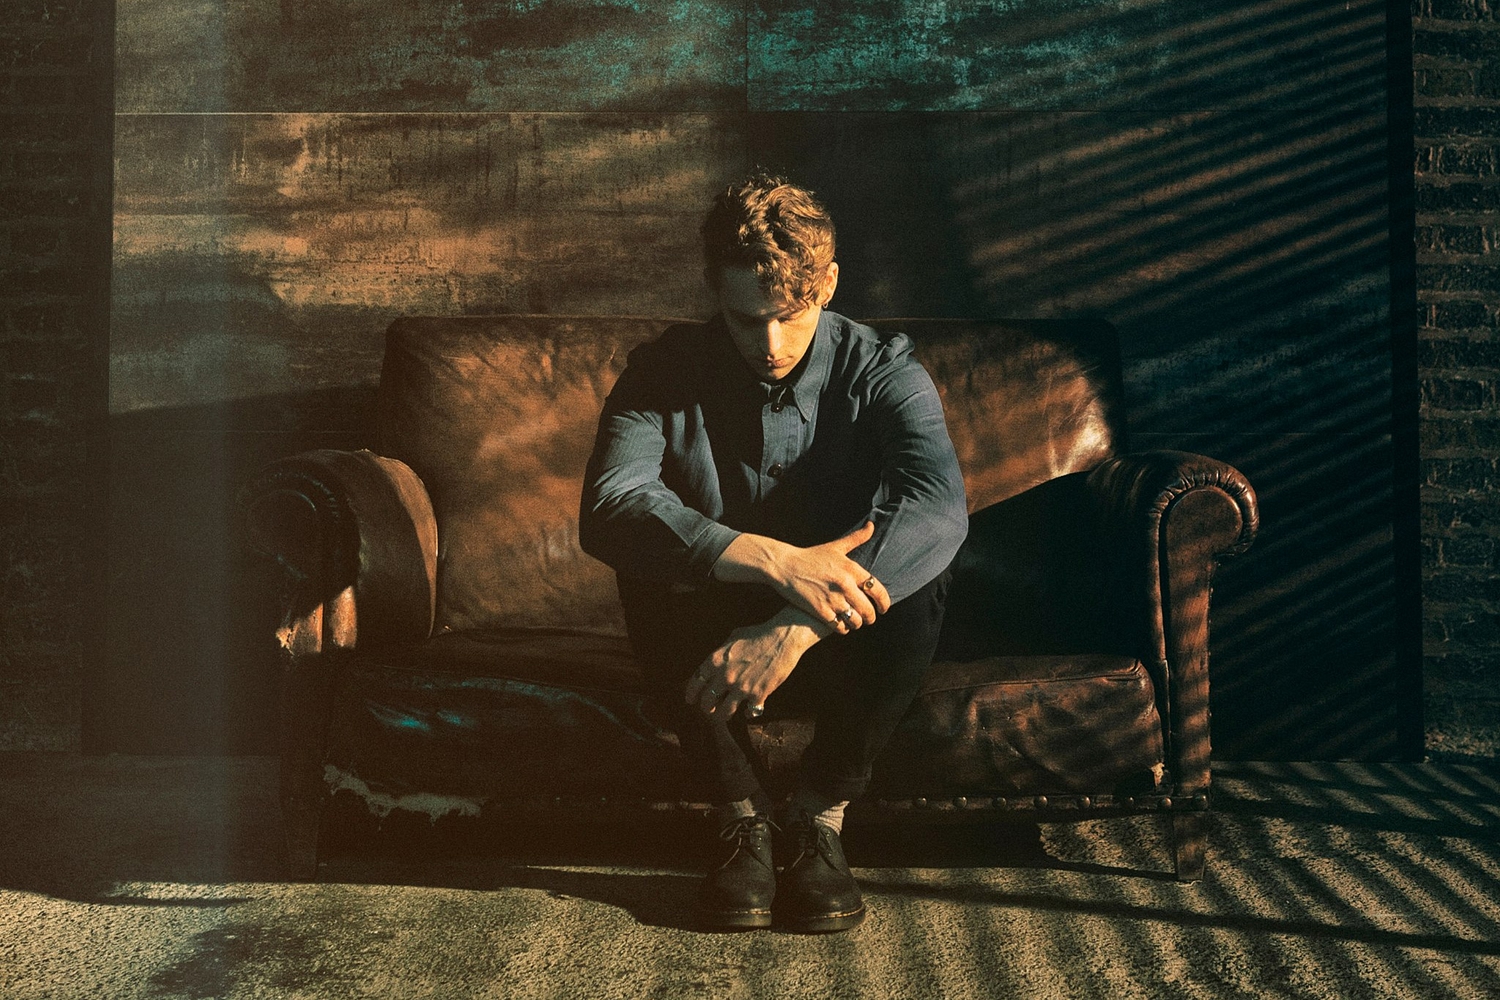 Rhodes unveils new standalone track, ‘The Lakes’